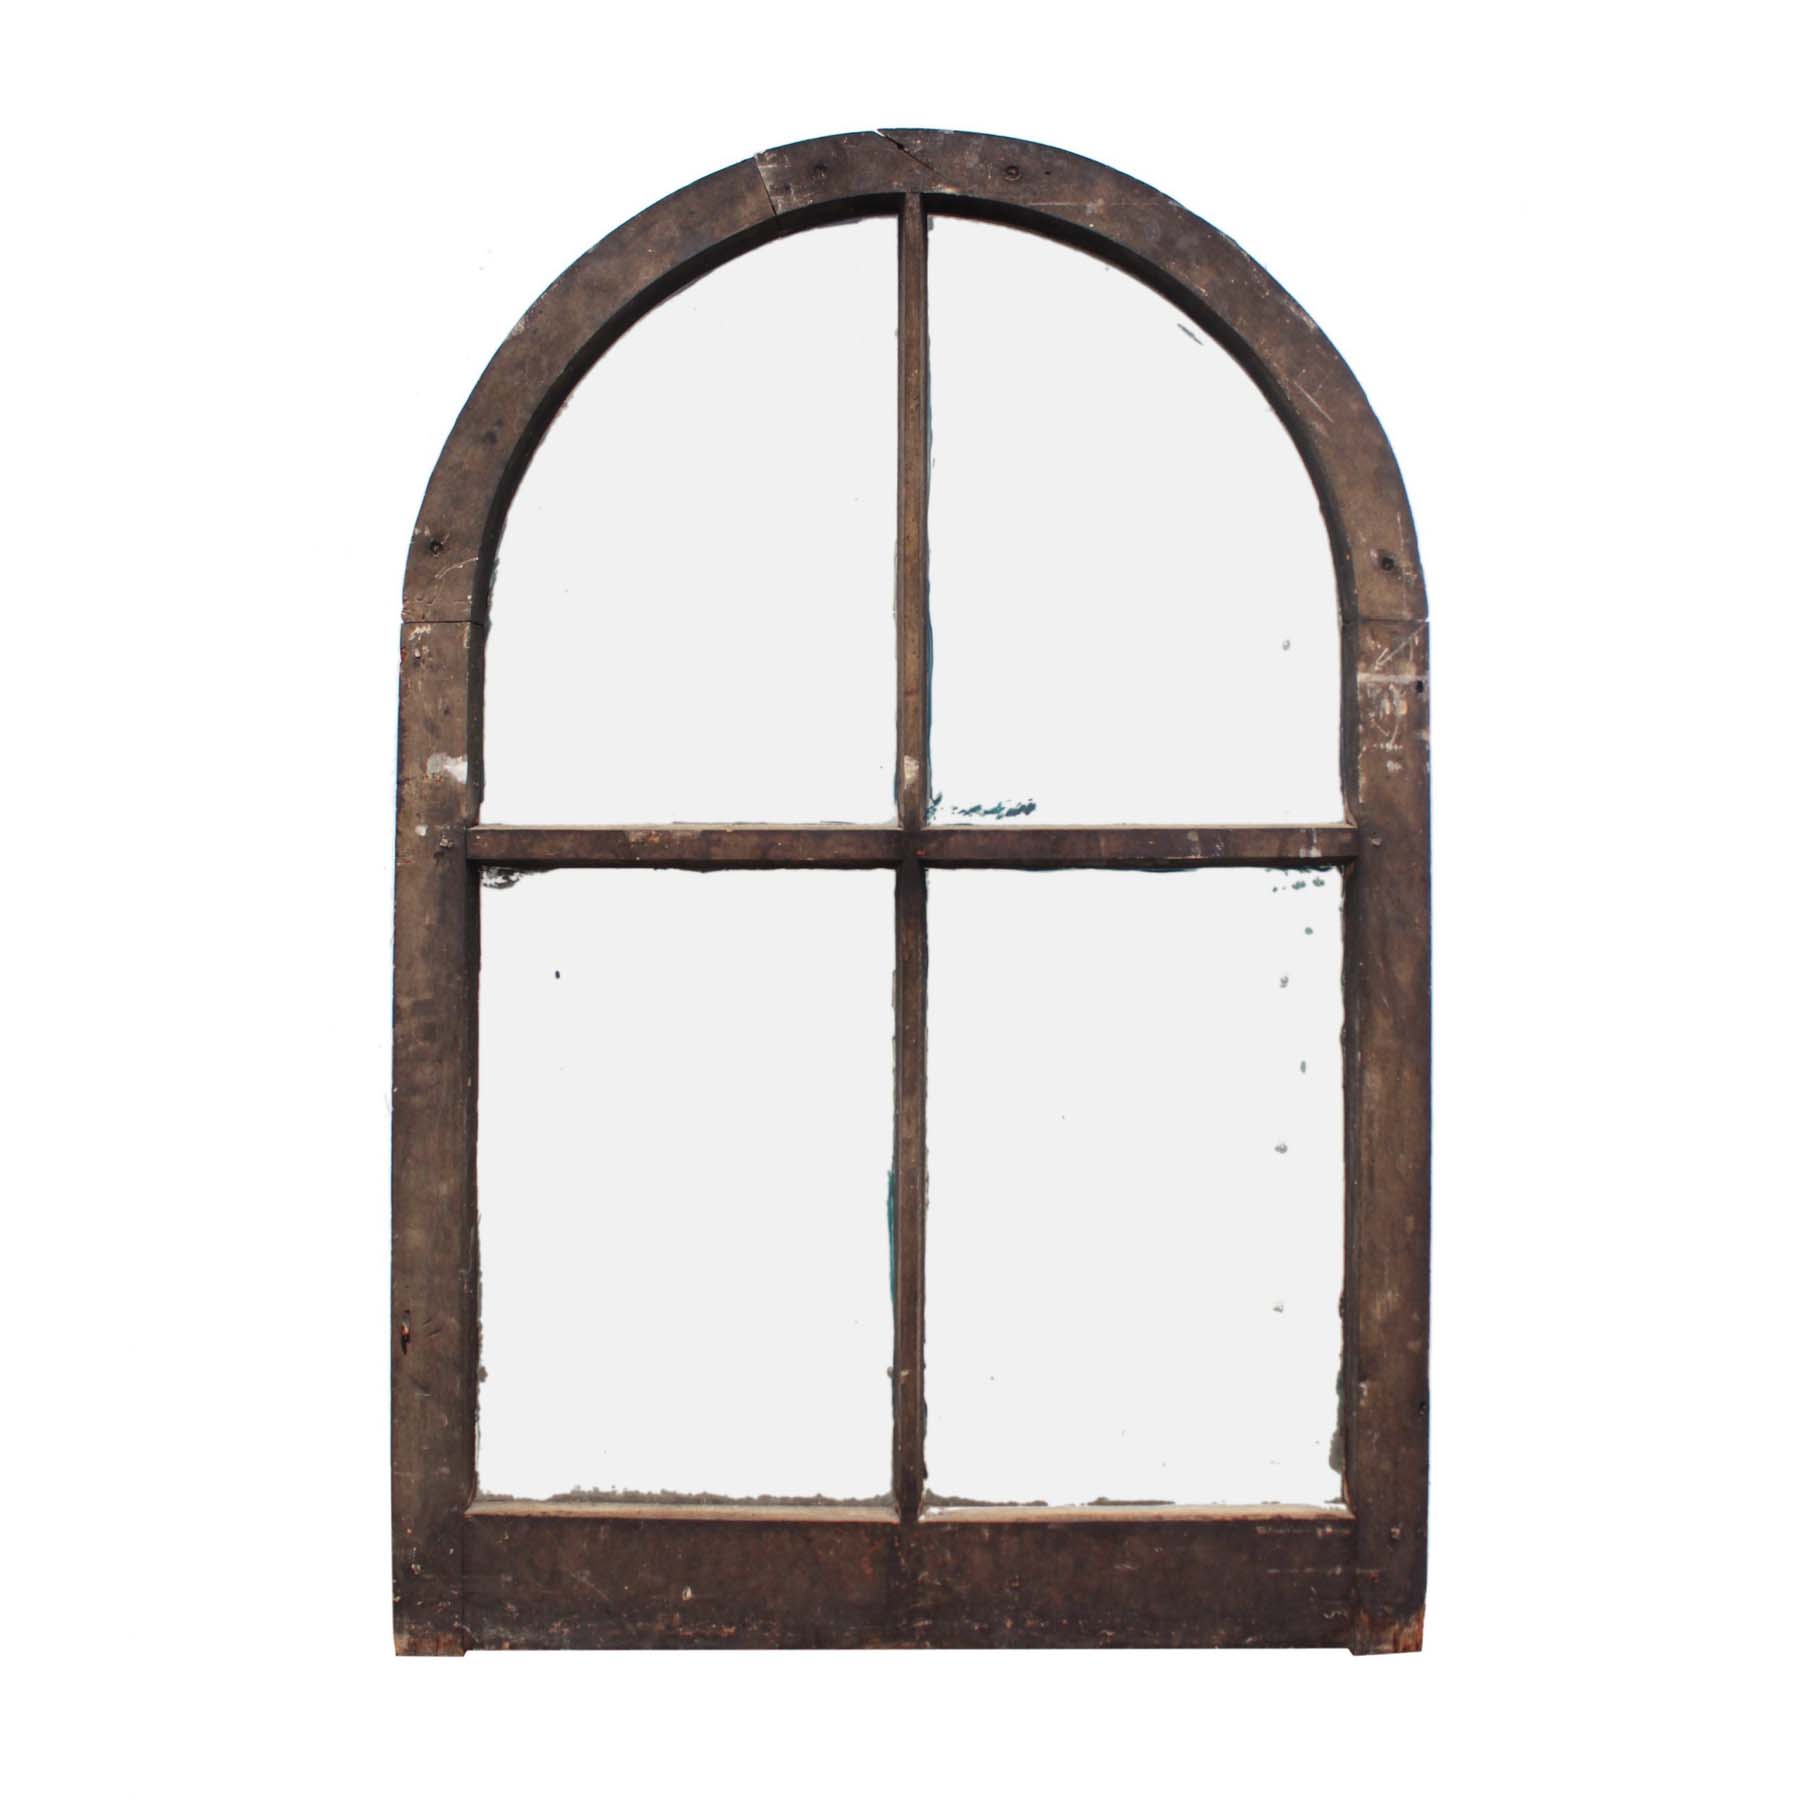 SOLD Reclaimed Antique Arched Windows, 19th Century-70136